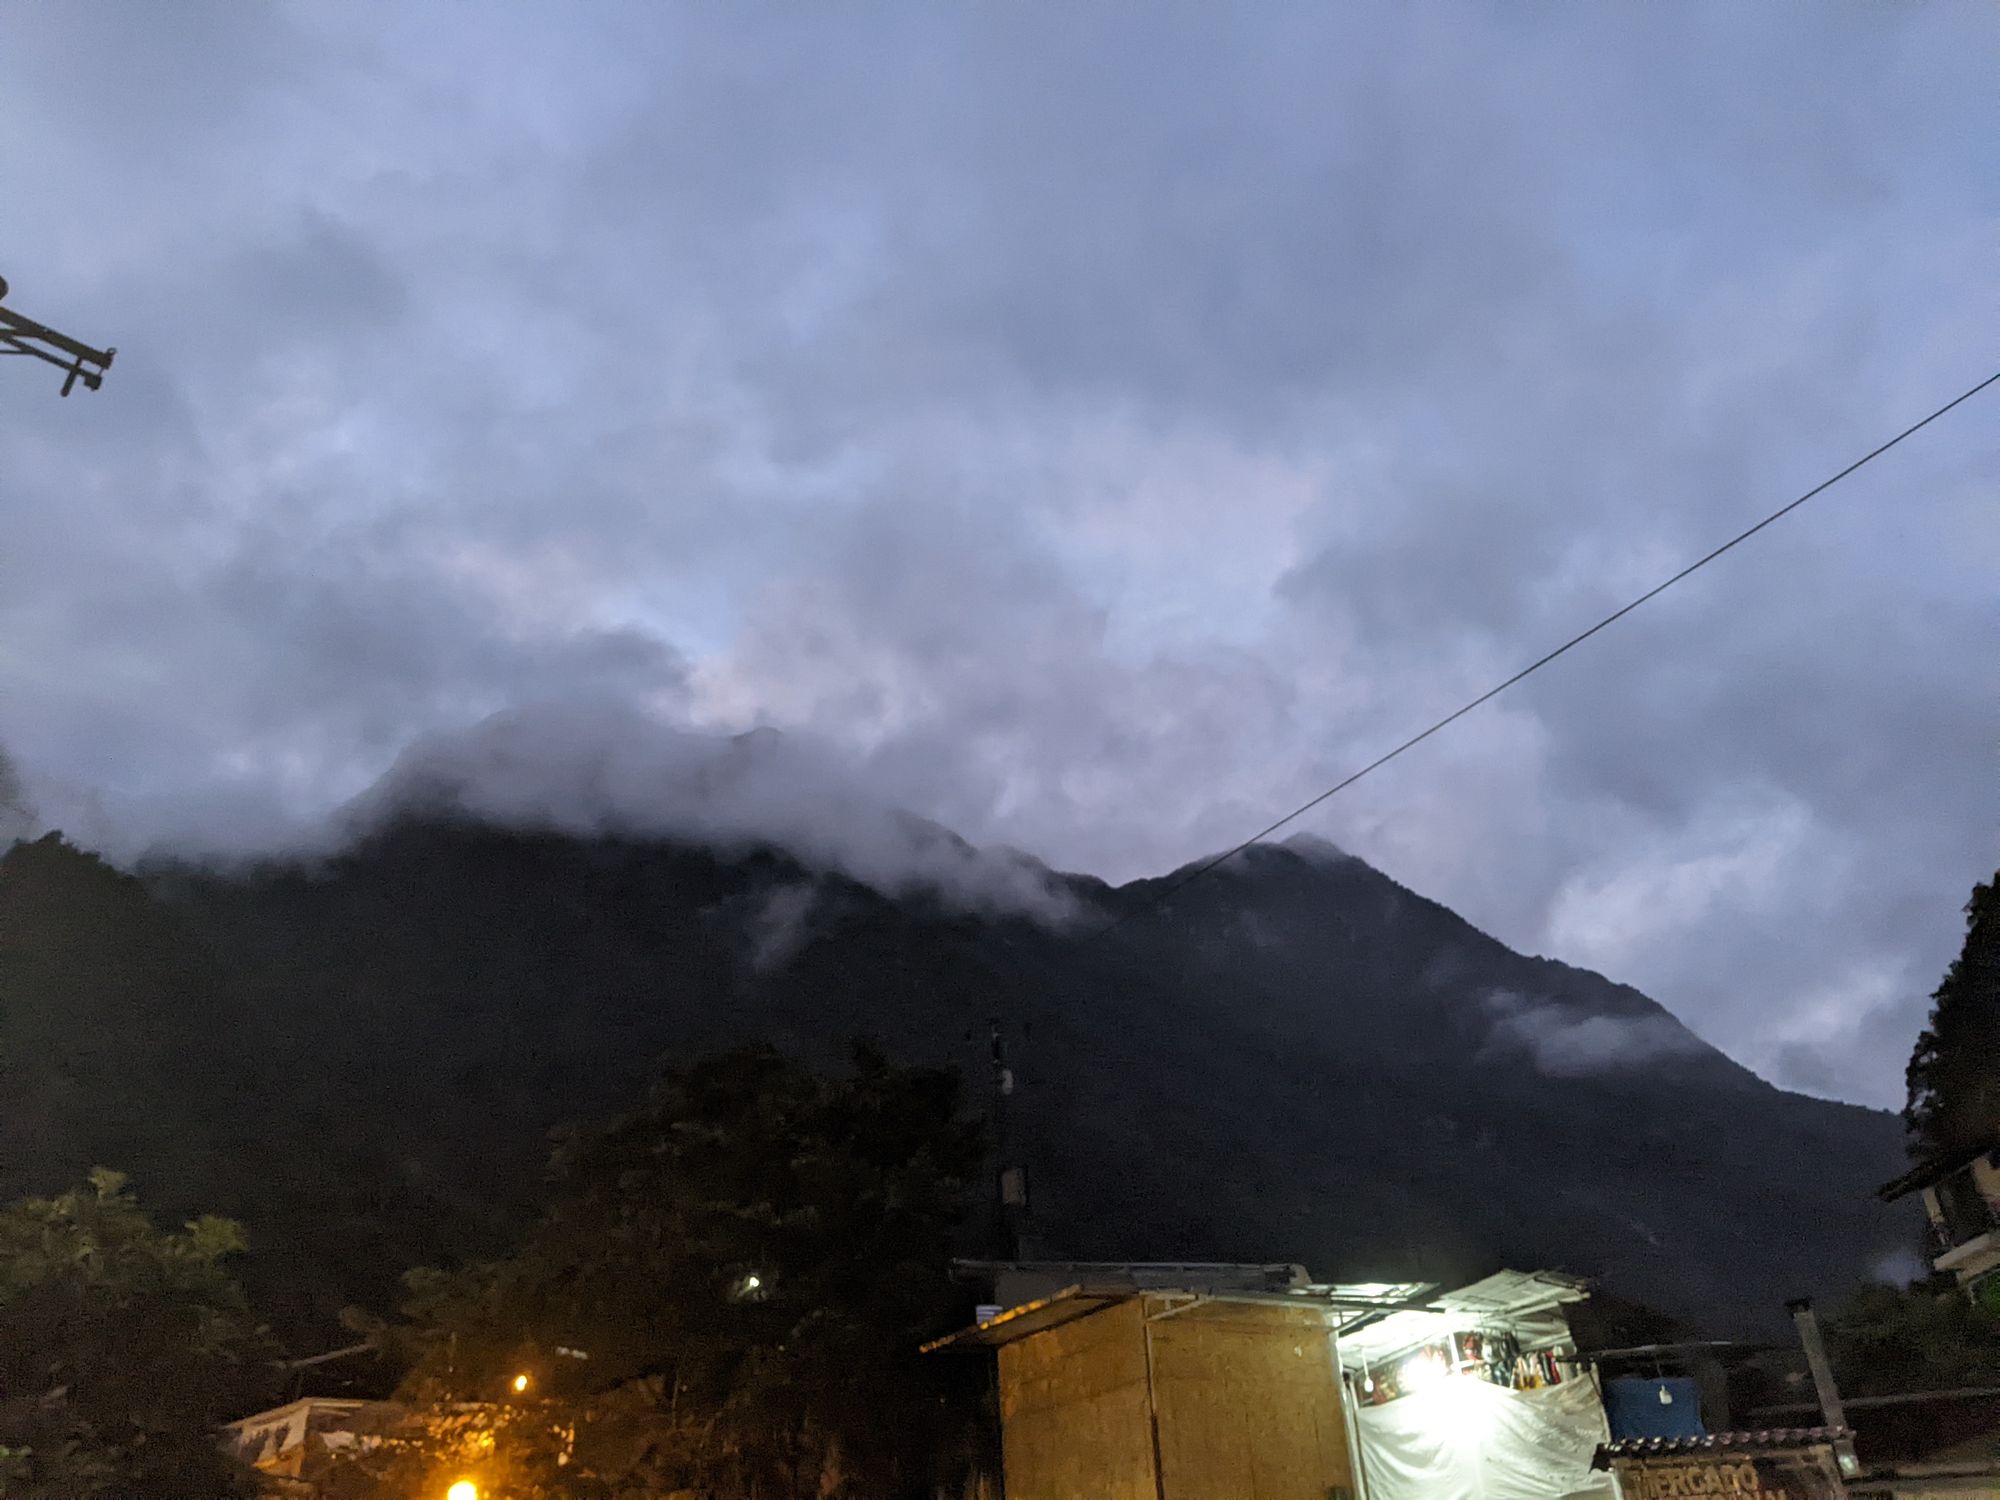 Clouds creeping below the mountains at dawn, the valley of Los Calientes felt very magical at this hour.